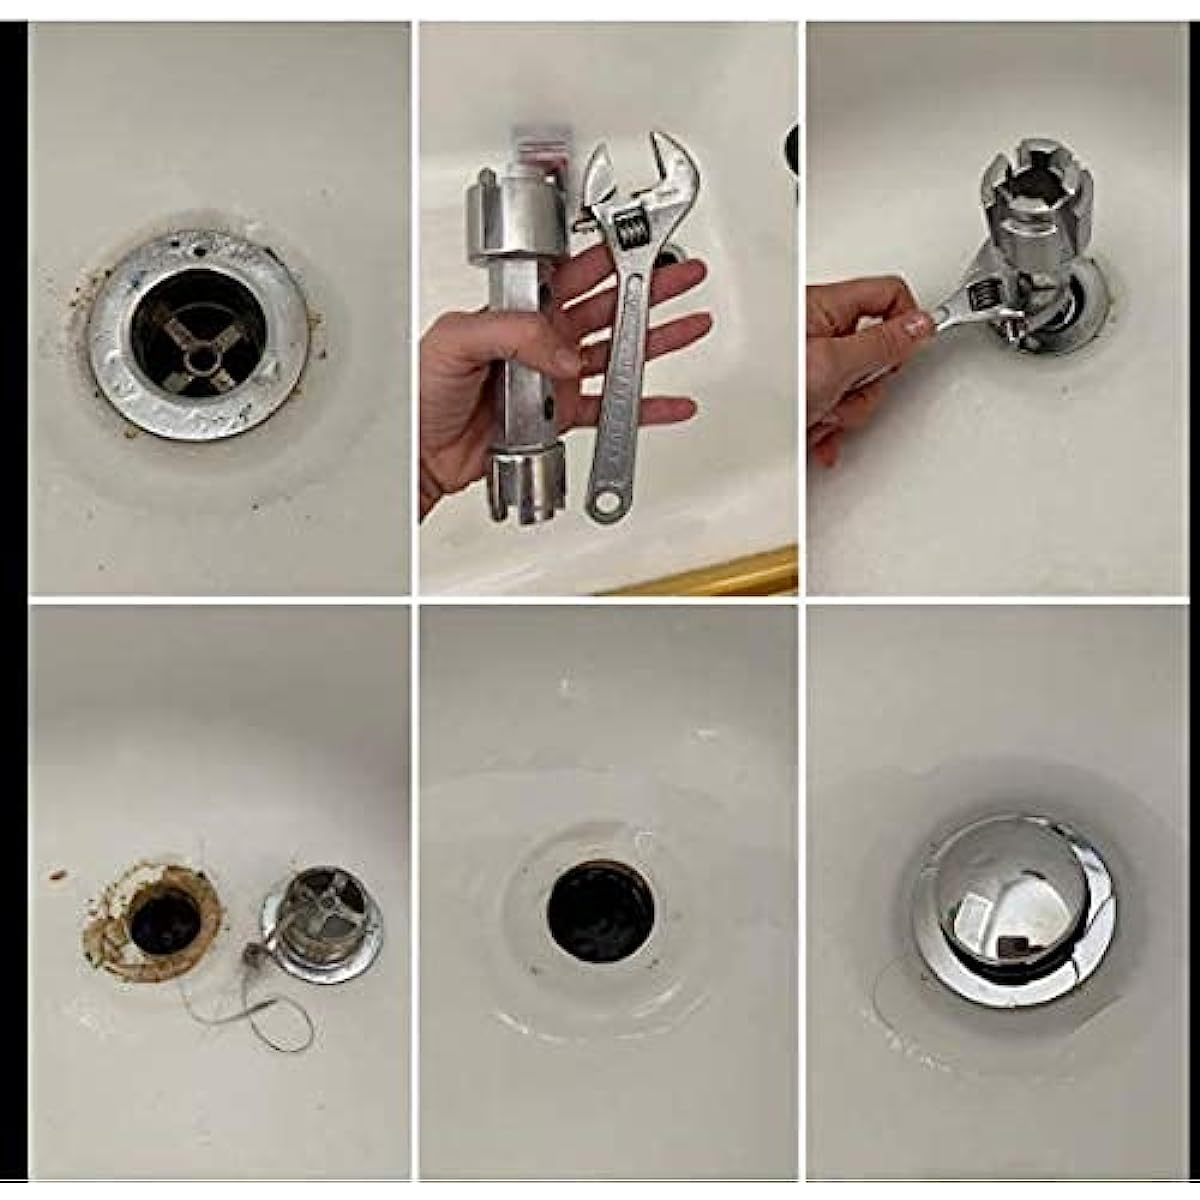 Bathtub Ratchet Wrench Tub Drain Remover Removal Tool Dual Ended Sink Wrench  